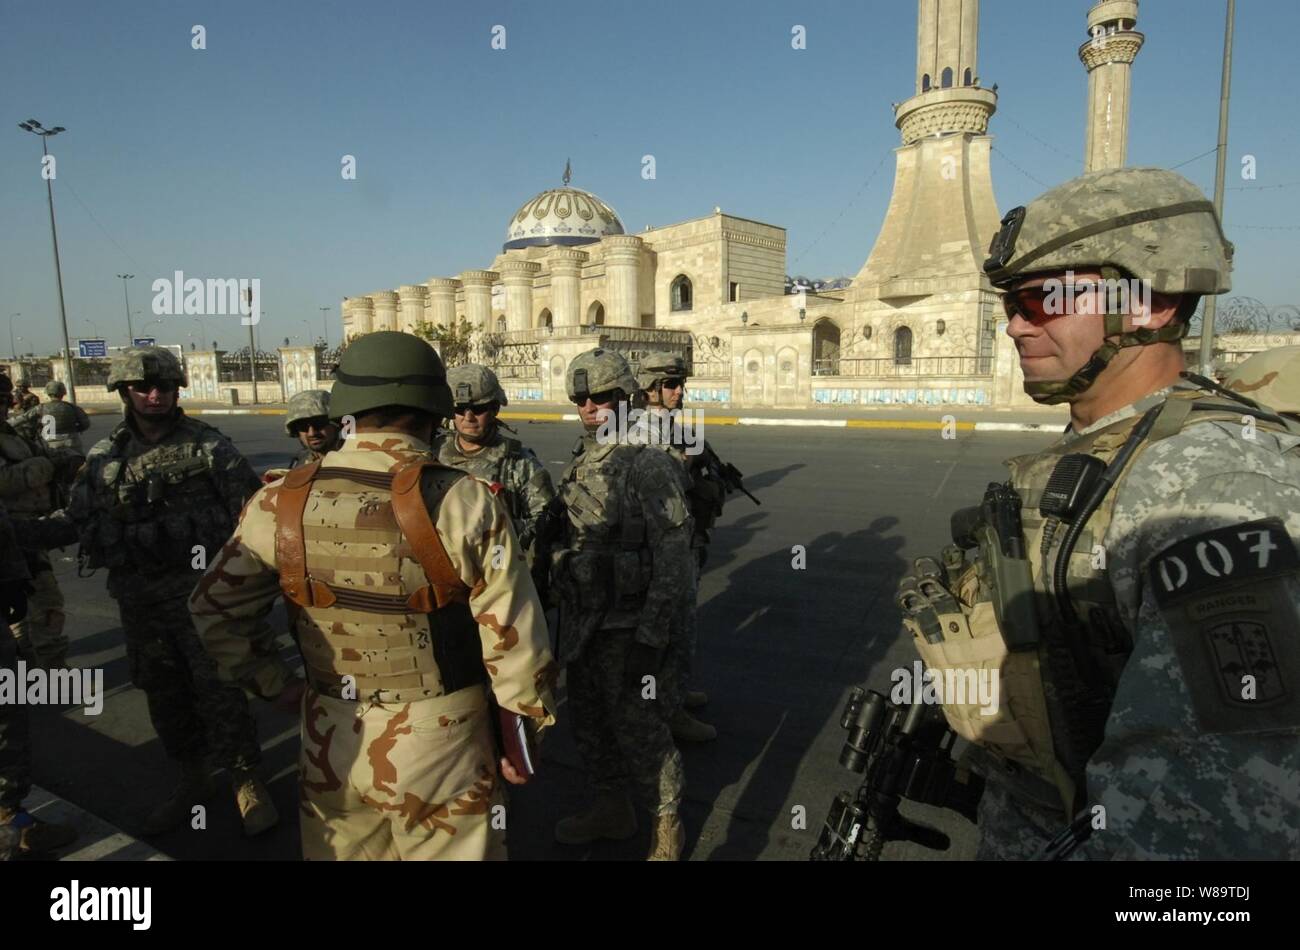 U.S. Army 1st Sgt. Dan L. Schoemaker helps secure the street outside of a mosque in the Ad Hamyah district of Baghdad, Iraq, so Iraqi army soldiers from the 9th Iraqi army can search it for ammunition caches on Sept. 2, 2006.  Schoemaker is assigned to Charlie Company, 1st Battalion, 17th Infantry Regiment, 172nd Stryker Brigade Combat Team. Stock Photo